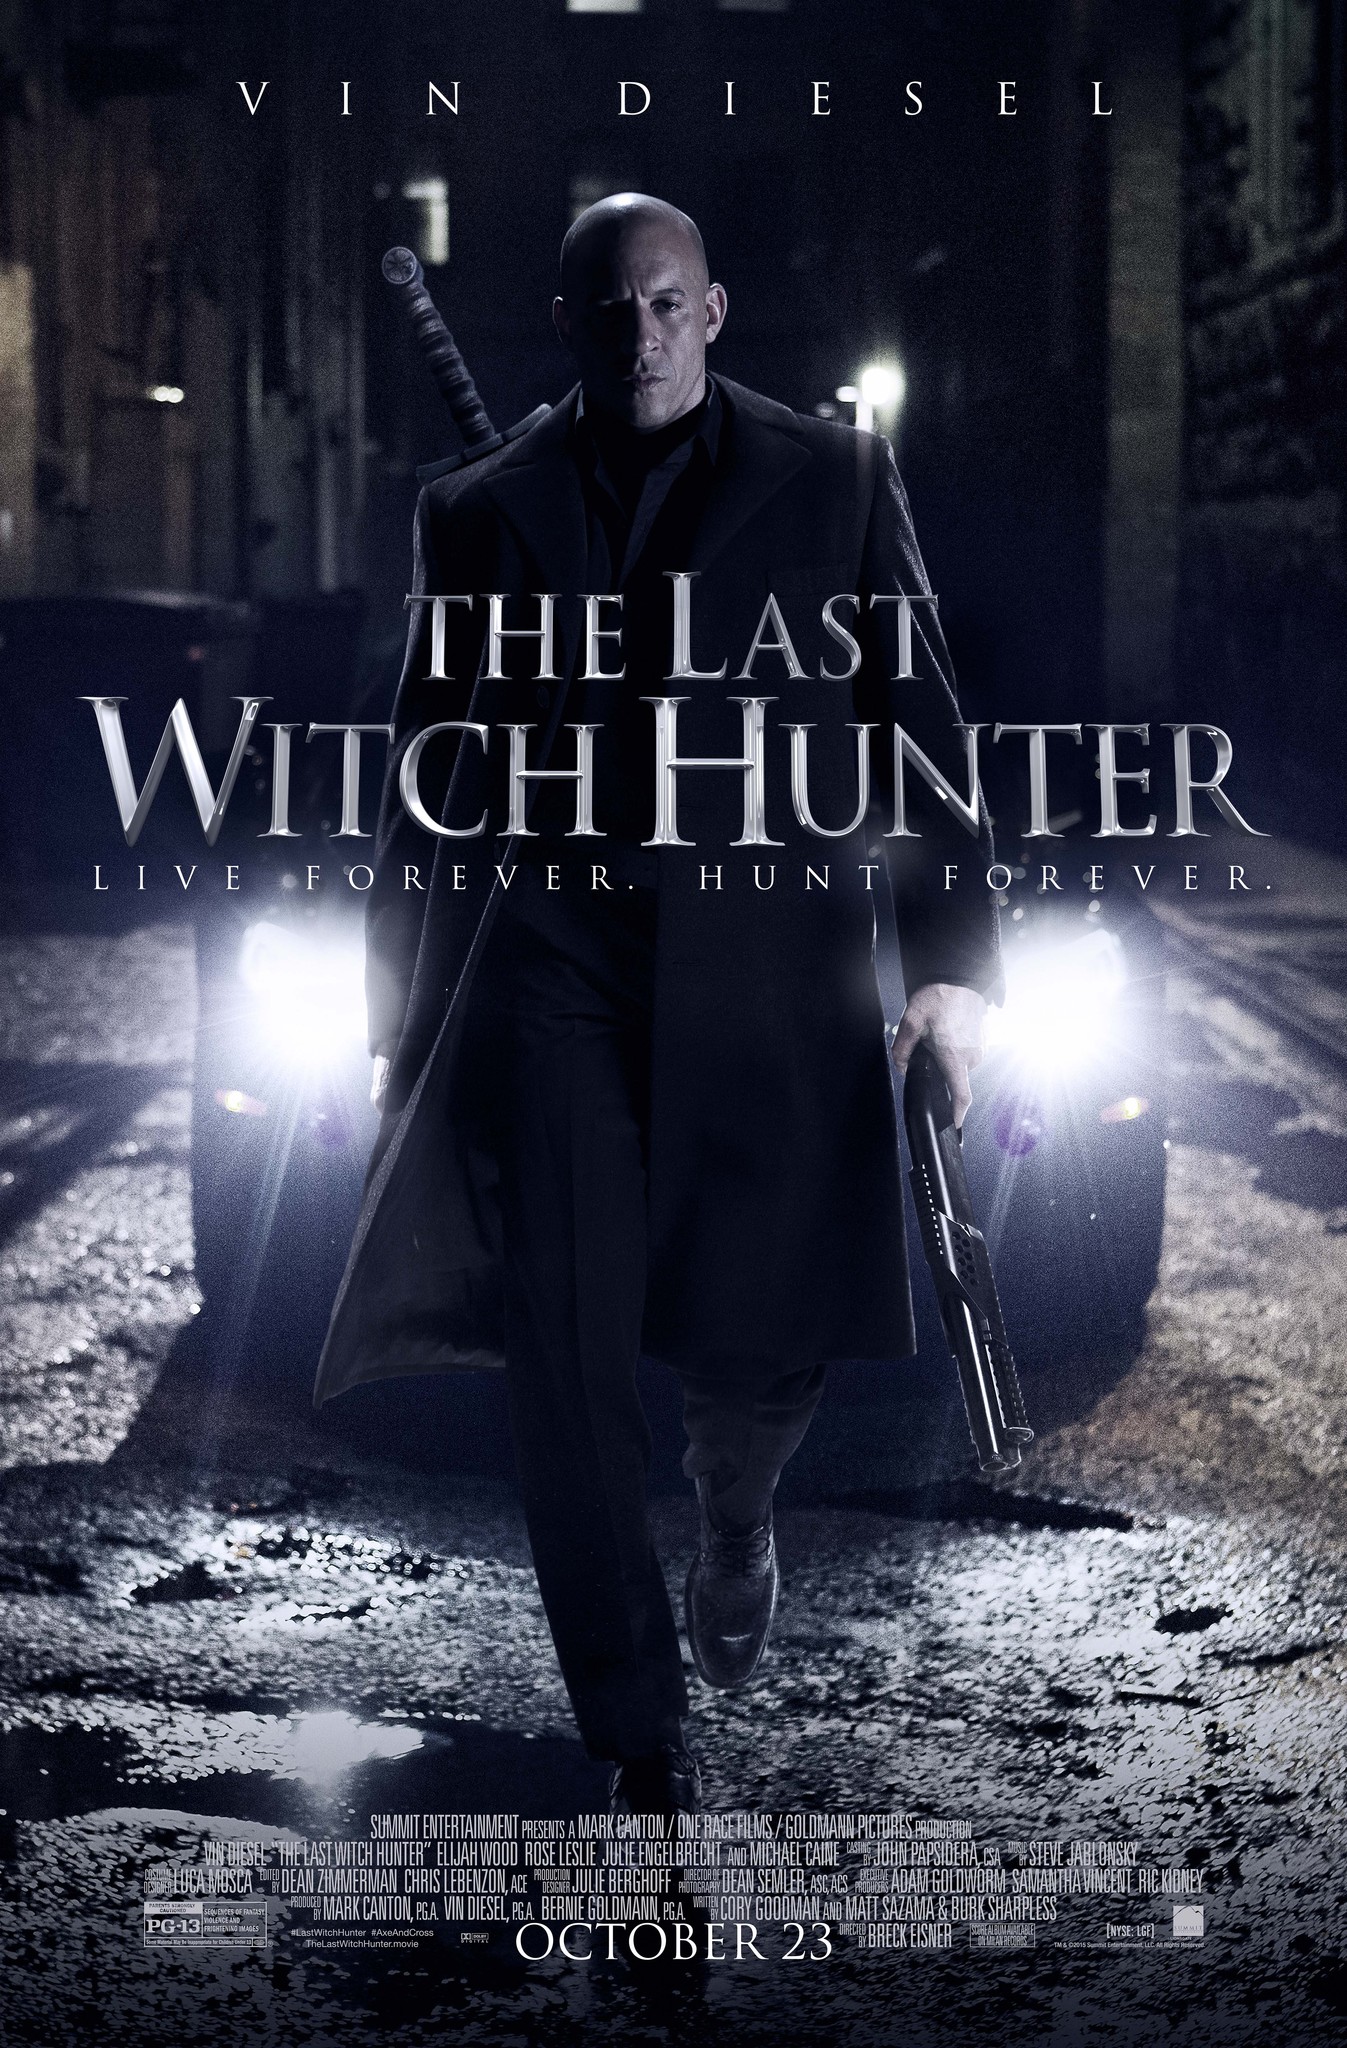 The Last Witch Hunter Full Movie Watch Online In Hindi Dubbed